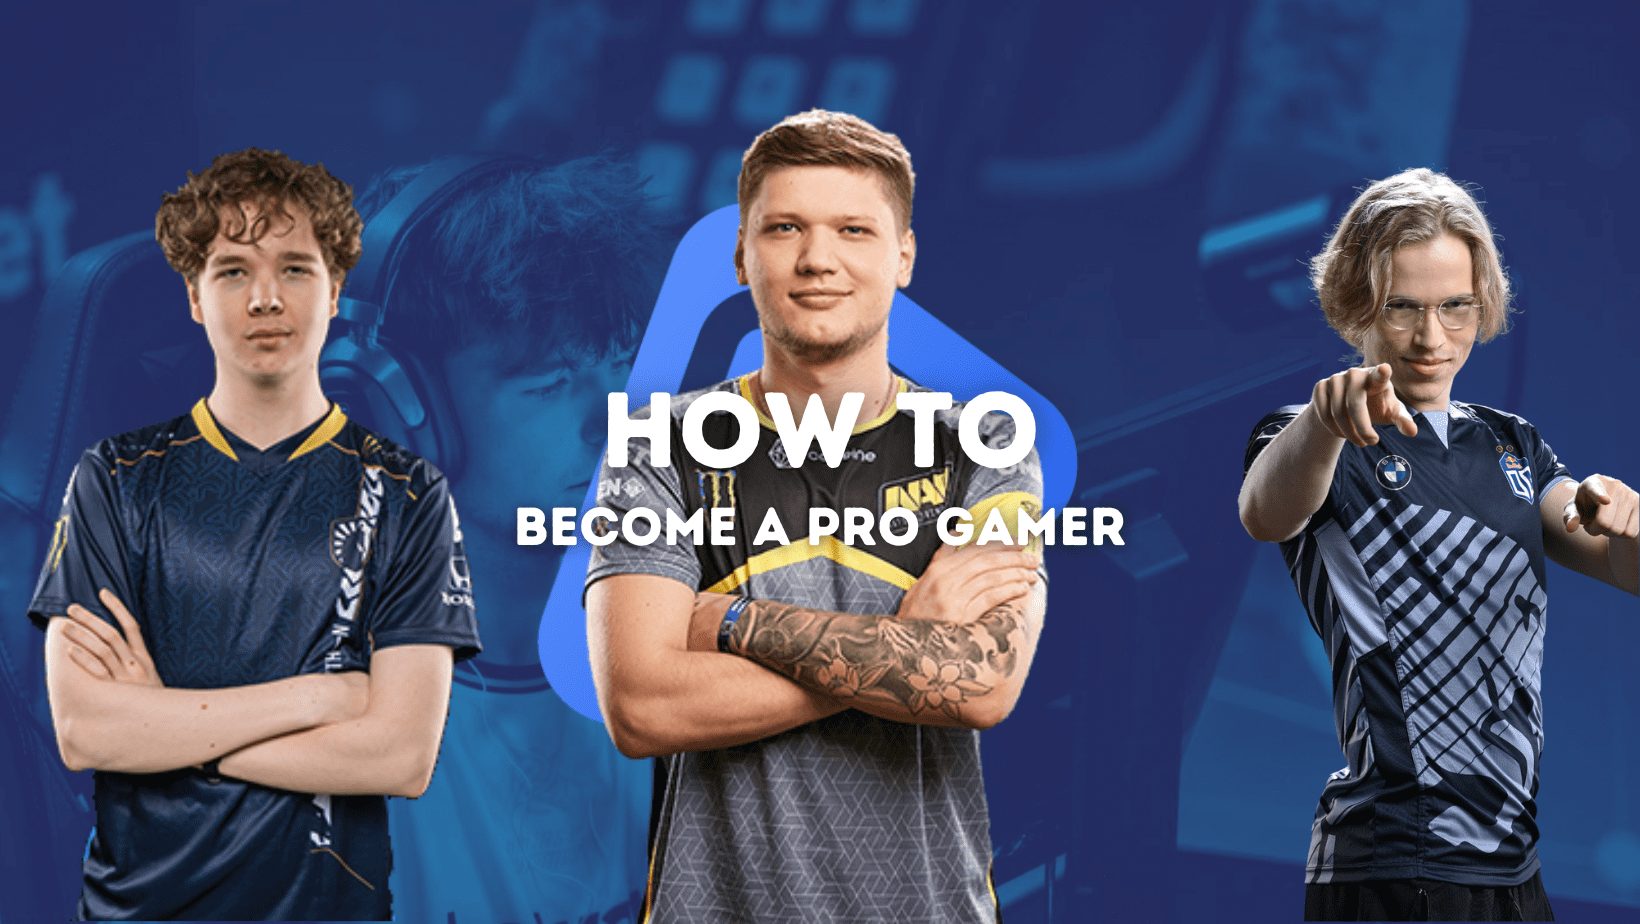 How to become a professional gamer